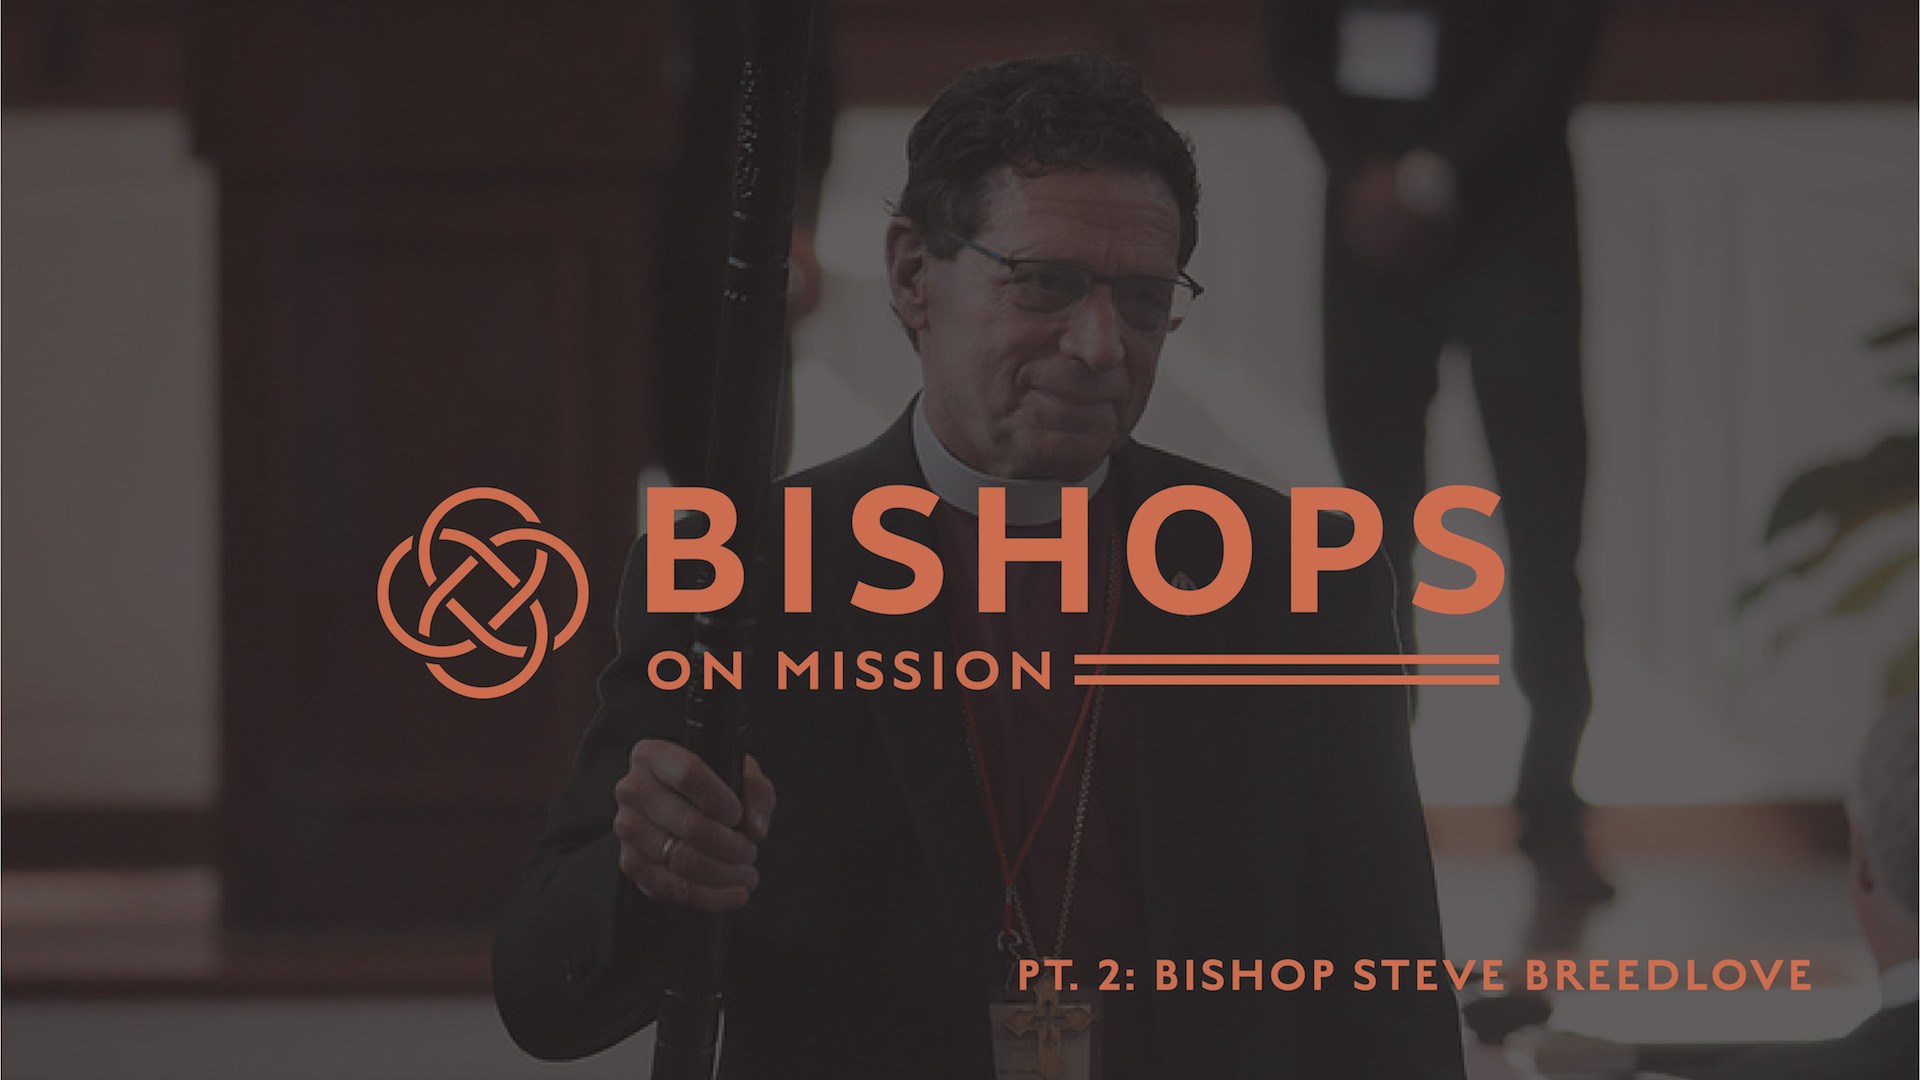 Always Engage Culture With Questions An Inter Bishop